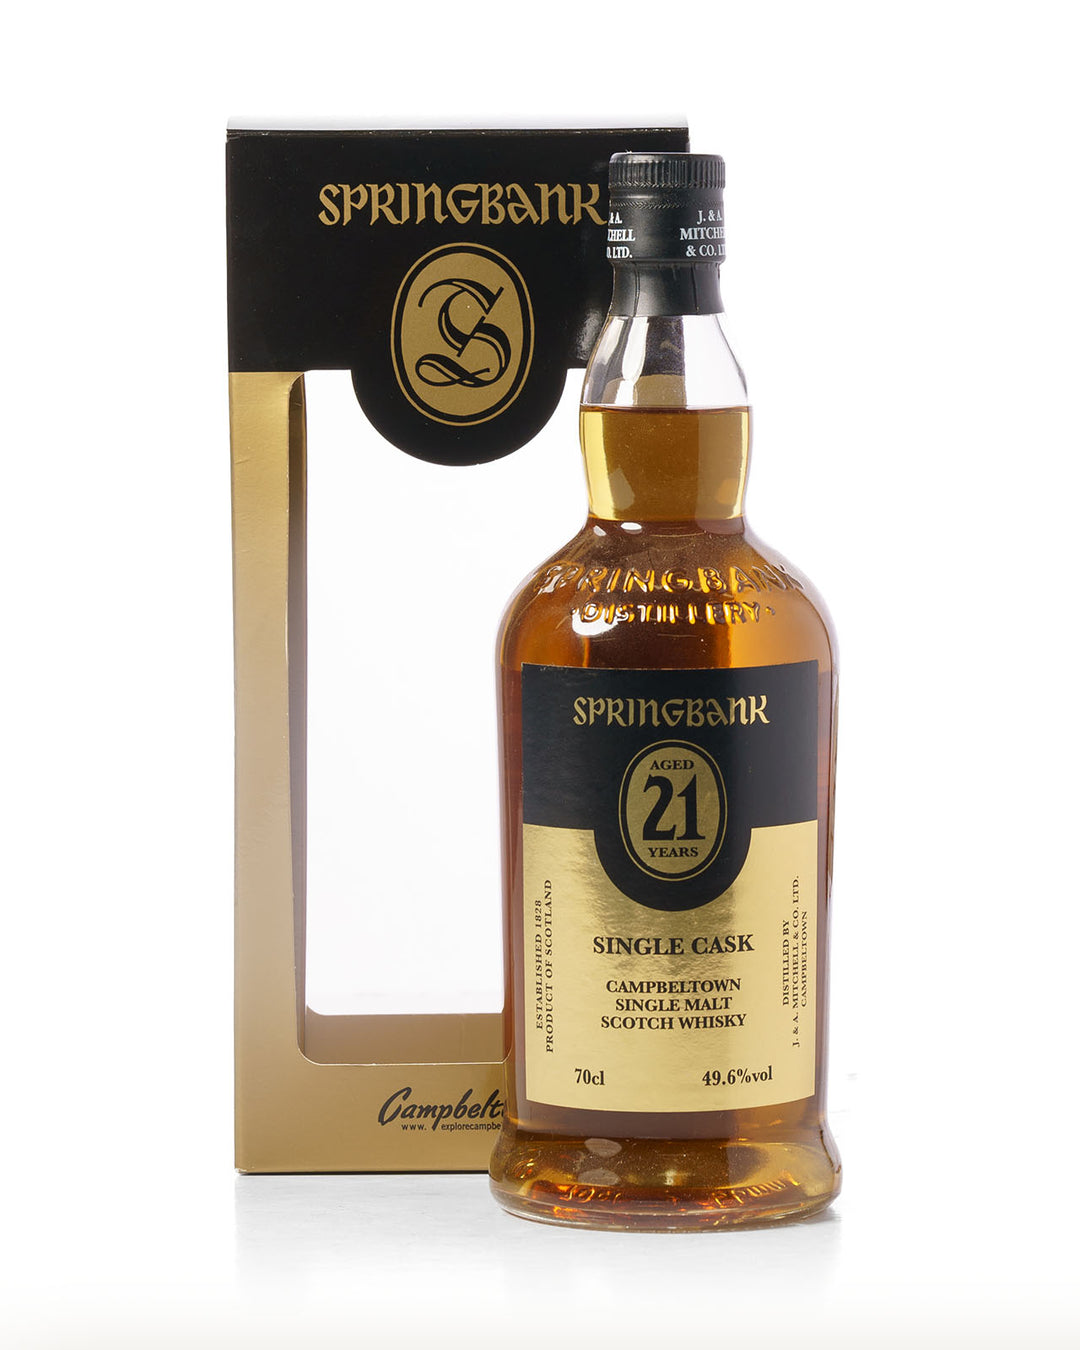 Springbank 21 Year Old Single Cask Bottled 2016 With Original Box